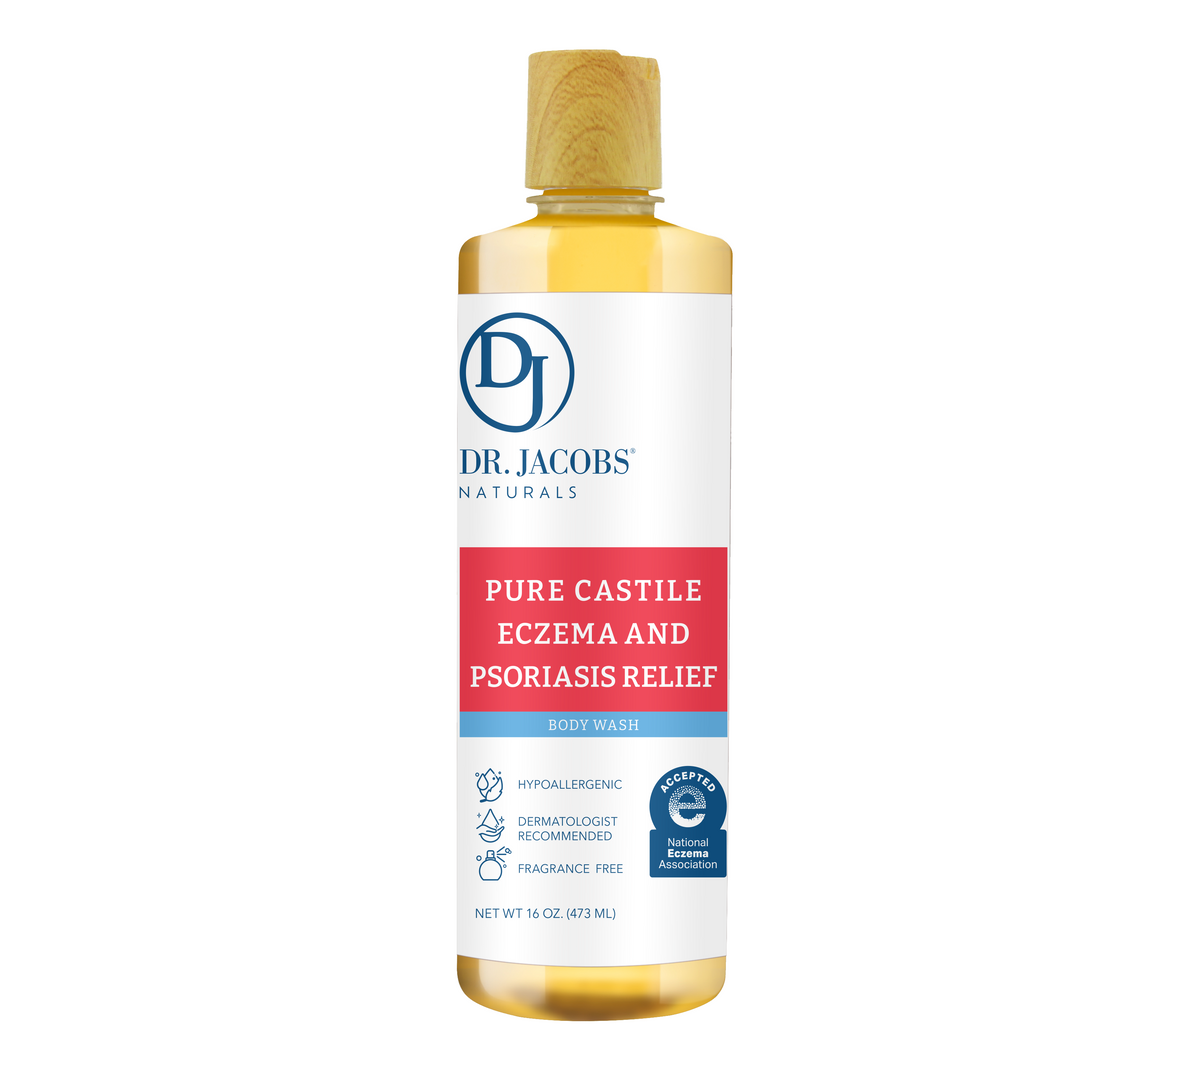 Castile Soap for Eczema and Psoriasis by Dr. Jacobs Naturals